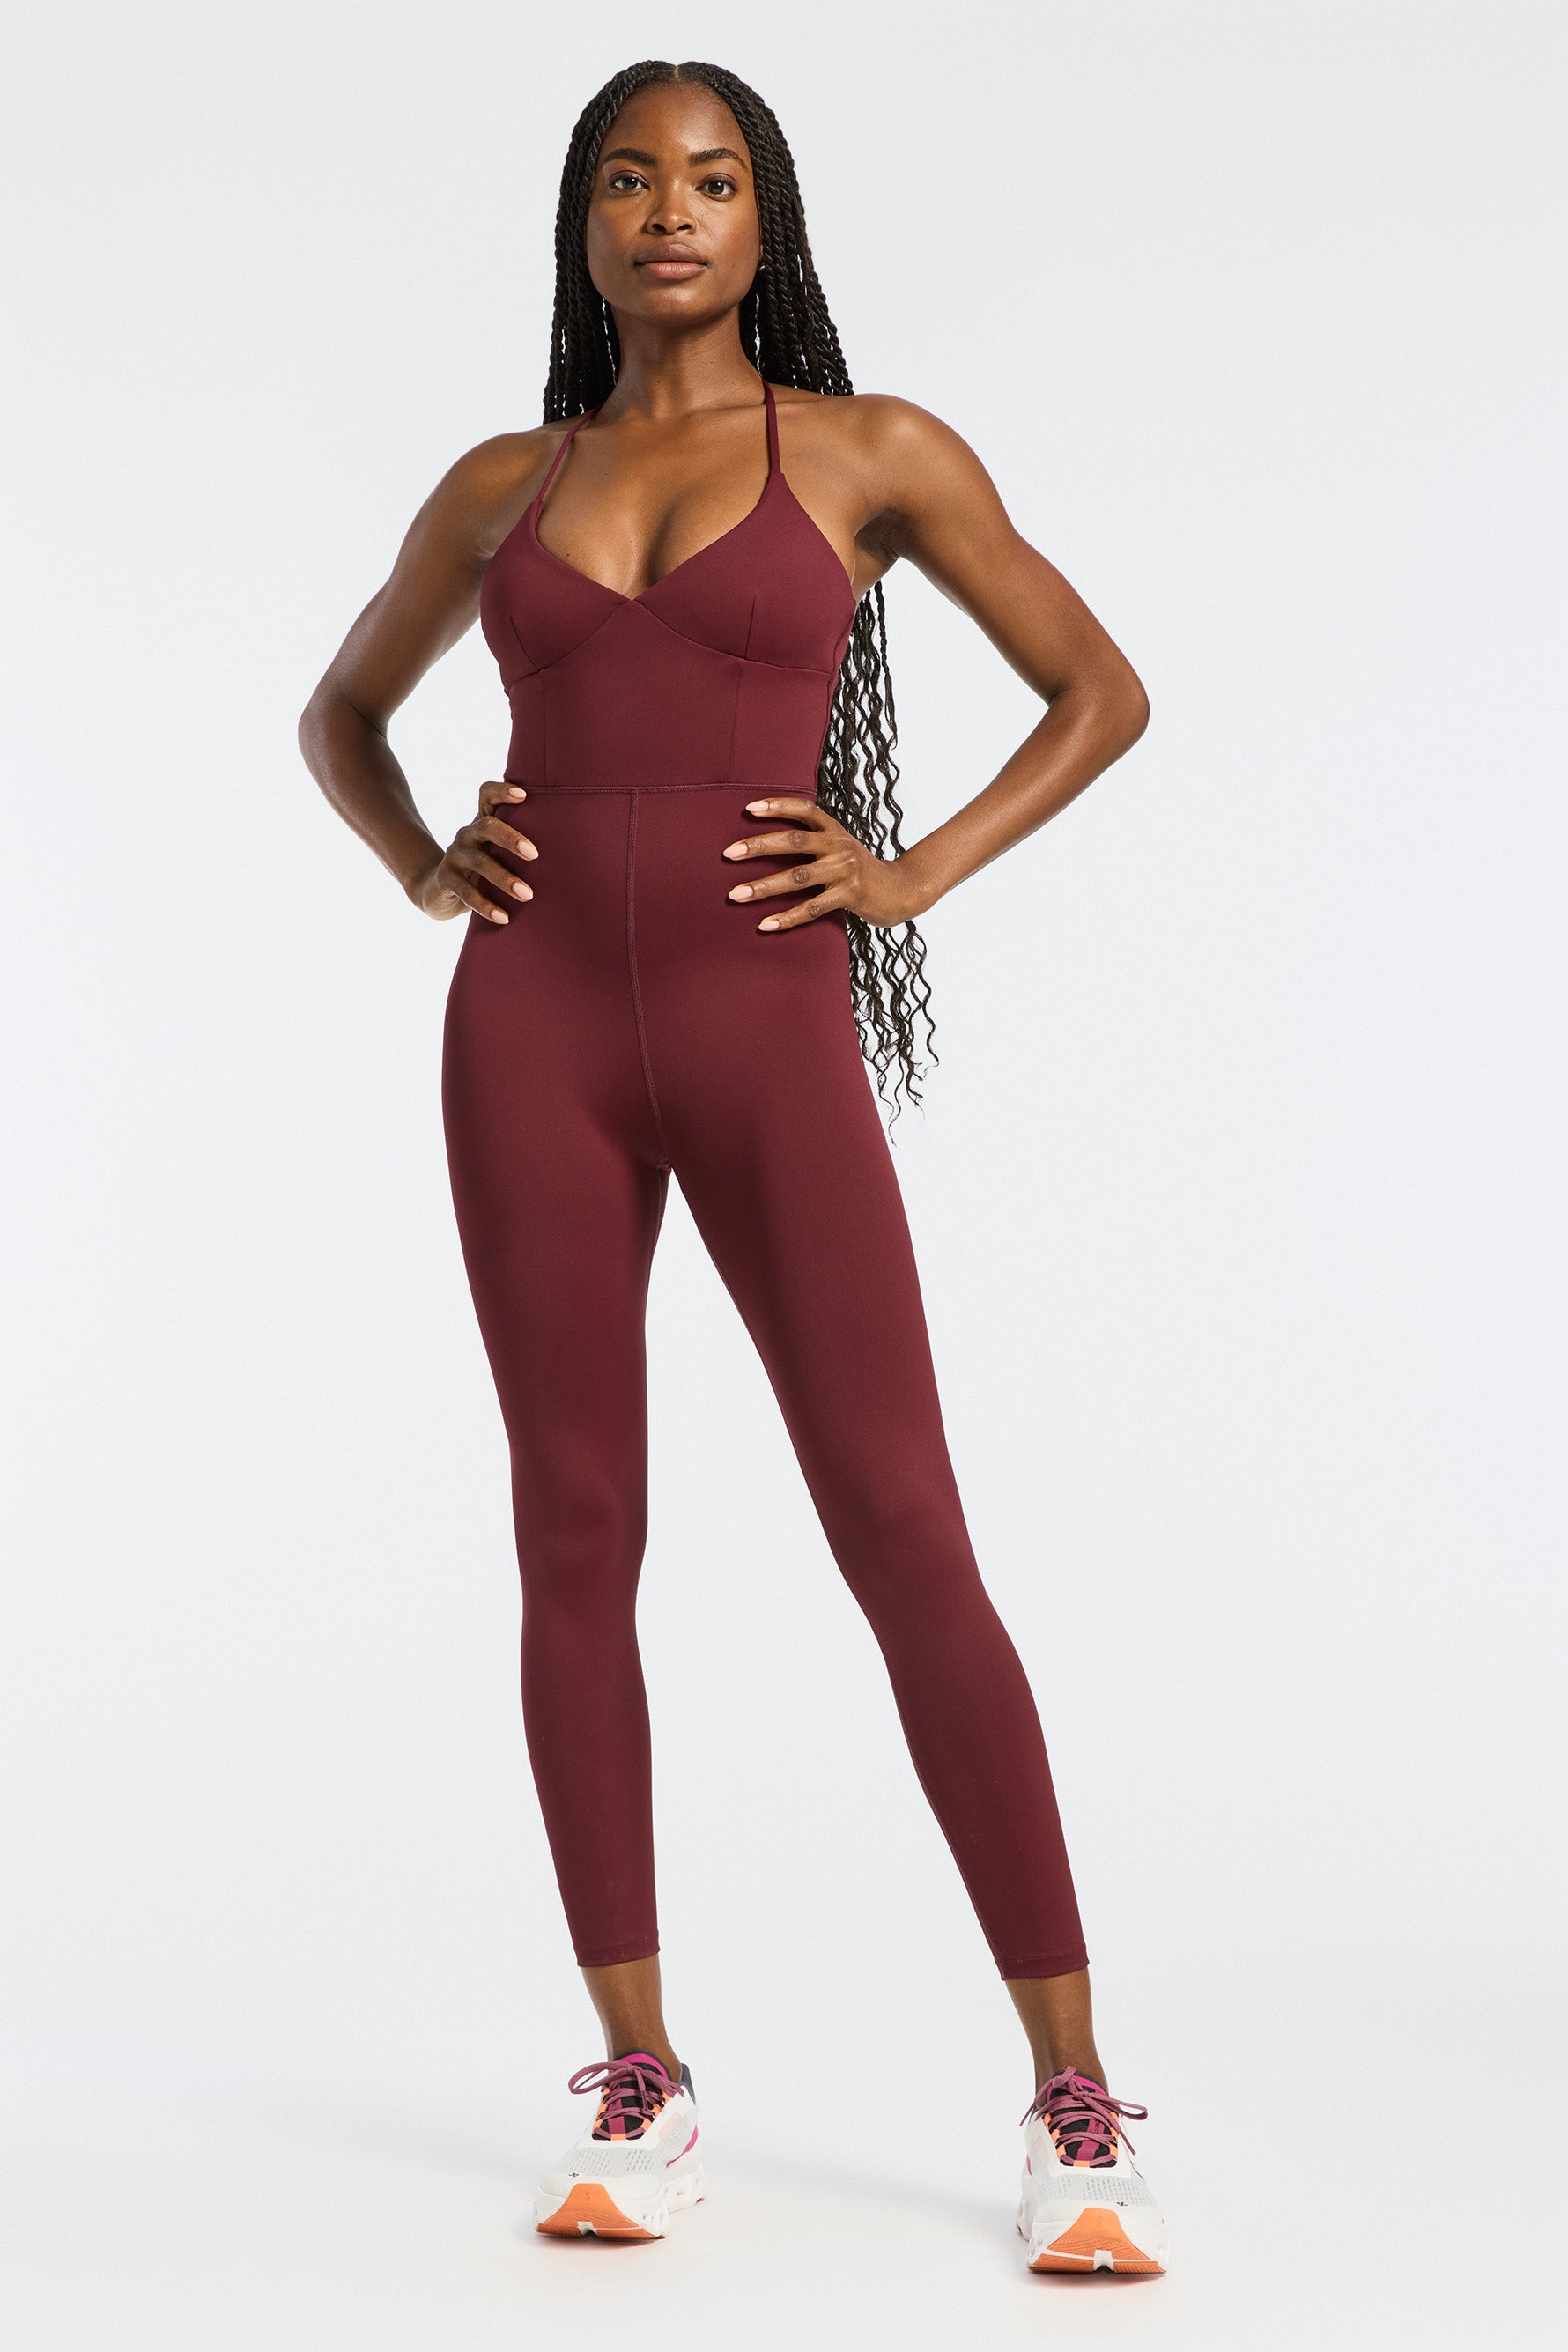 IVL Collective, Pants & Jumpsuits, Nwts Ivl Collective Mesh Insert Legging